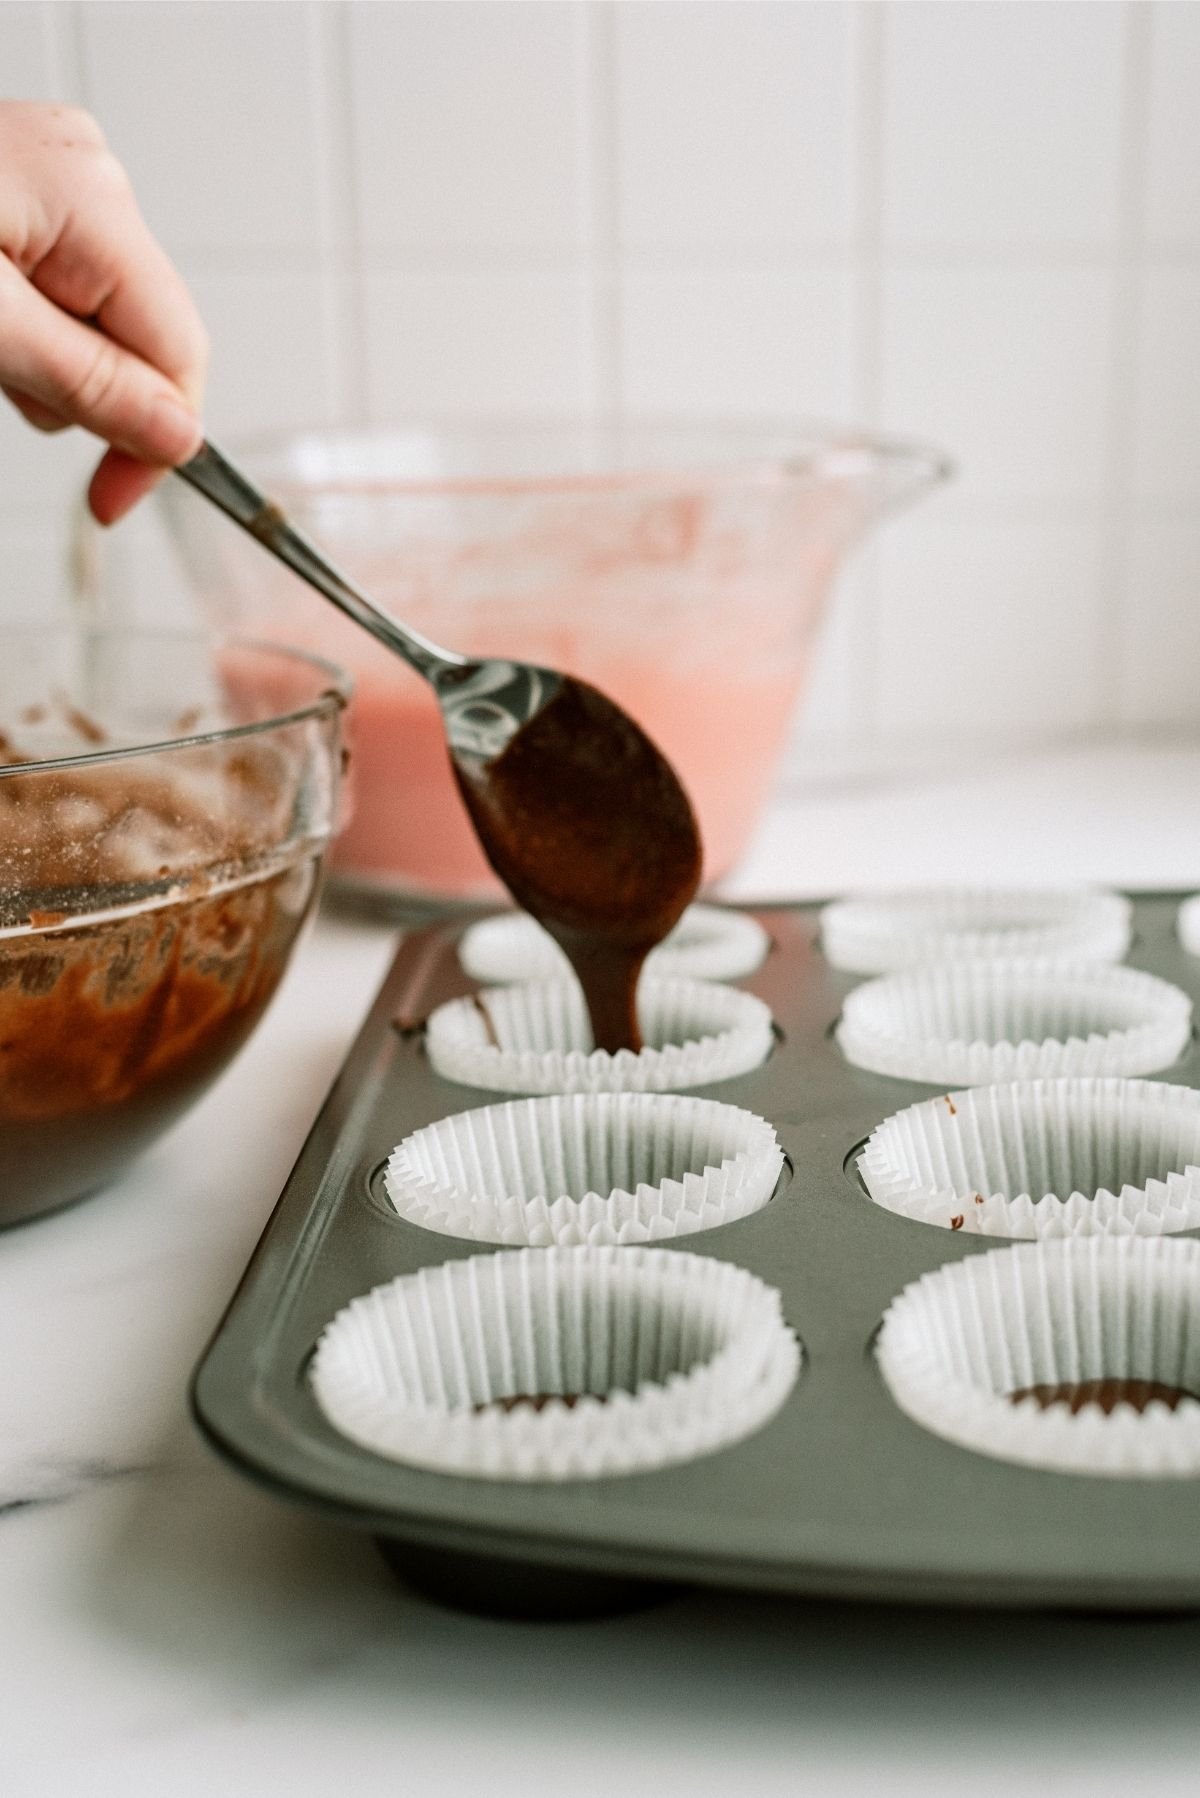 Brownie batter in muffin tin for Neapolitan Cupcakes